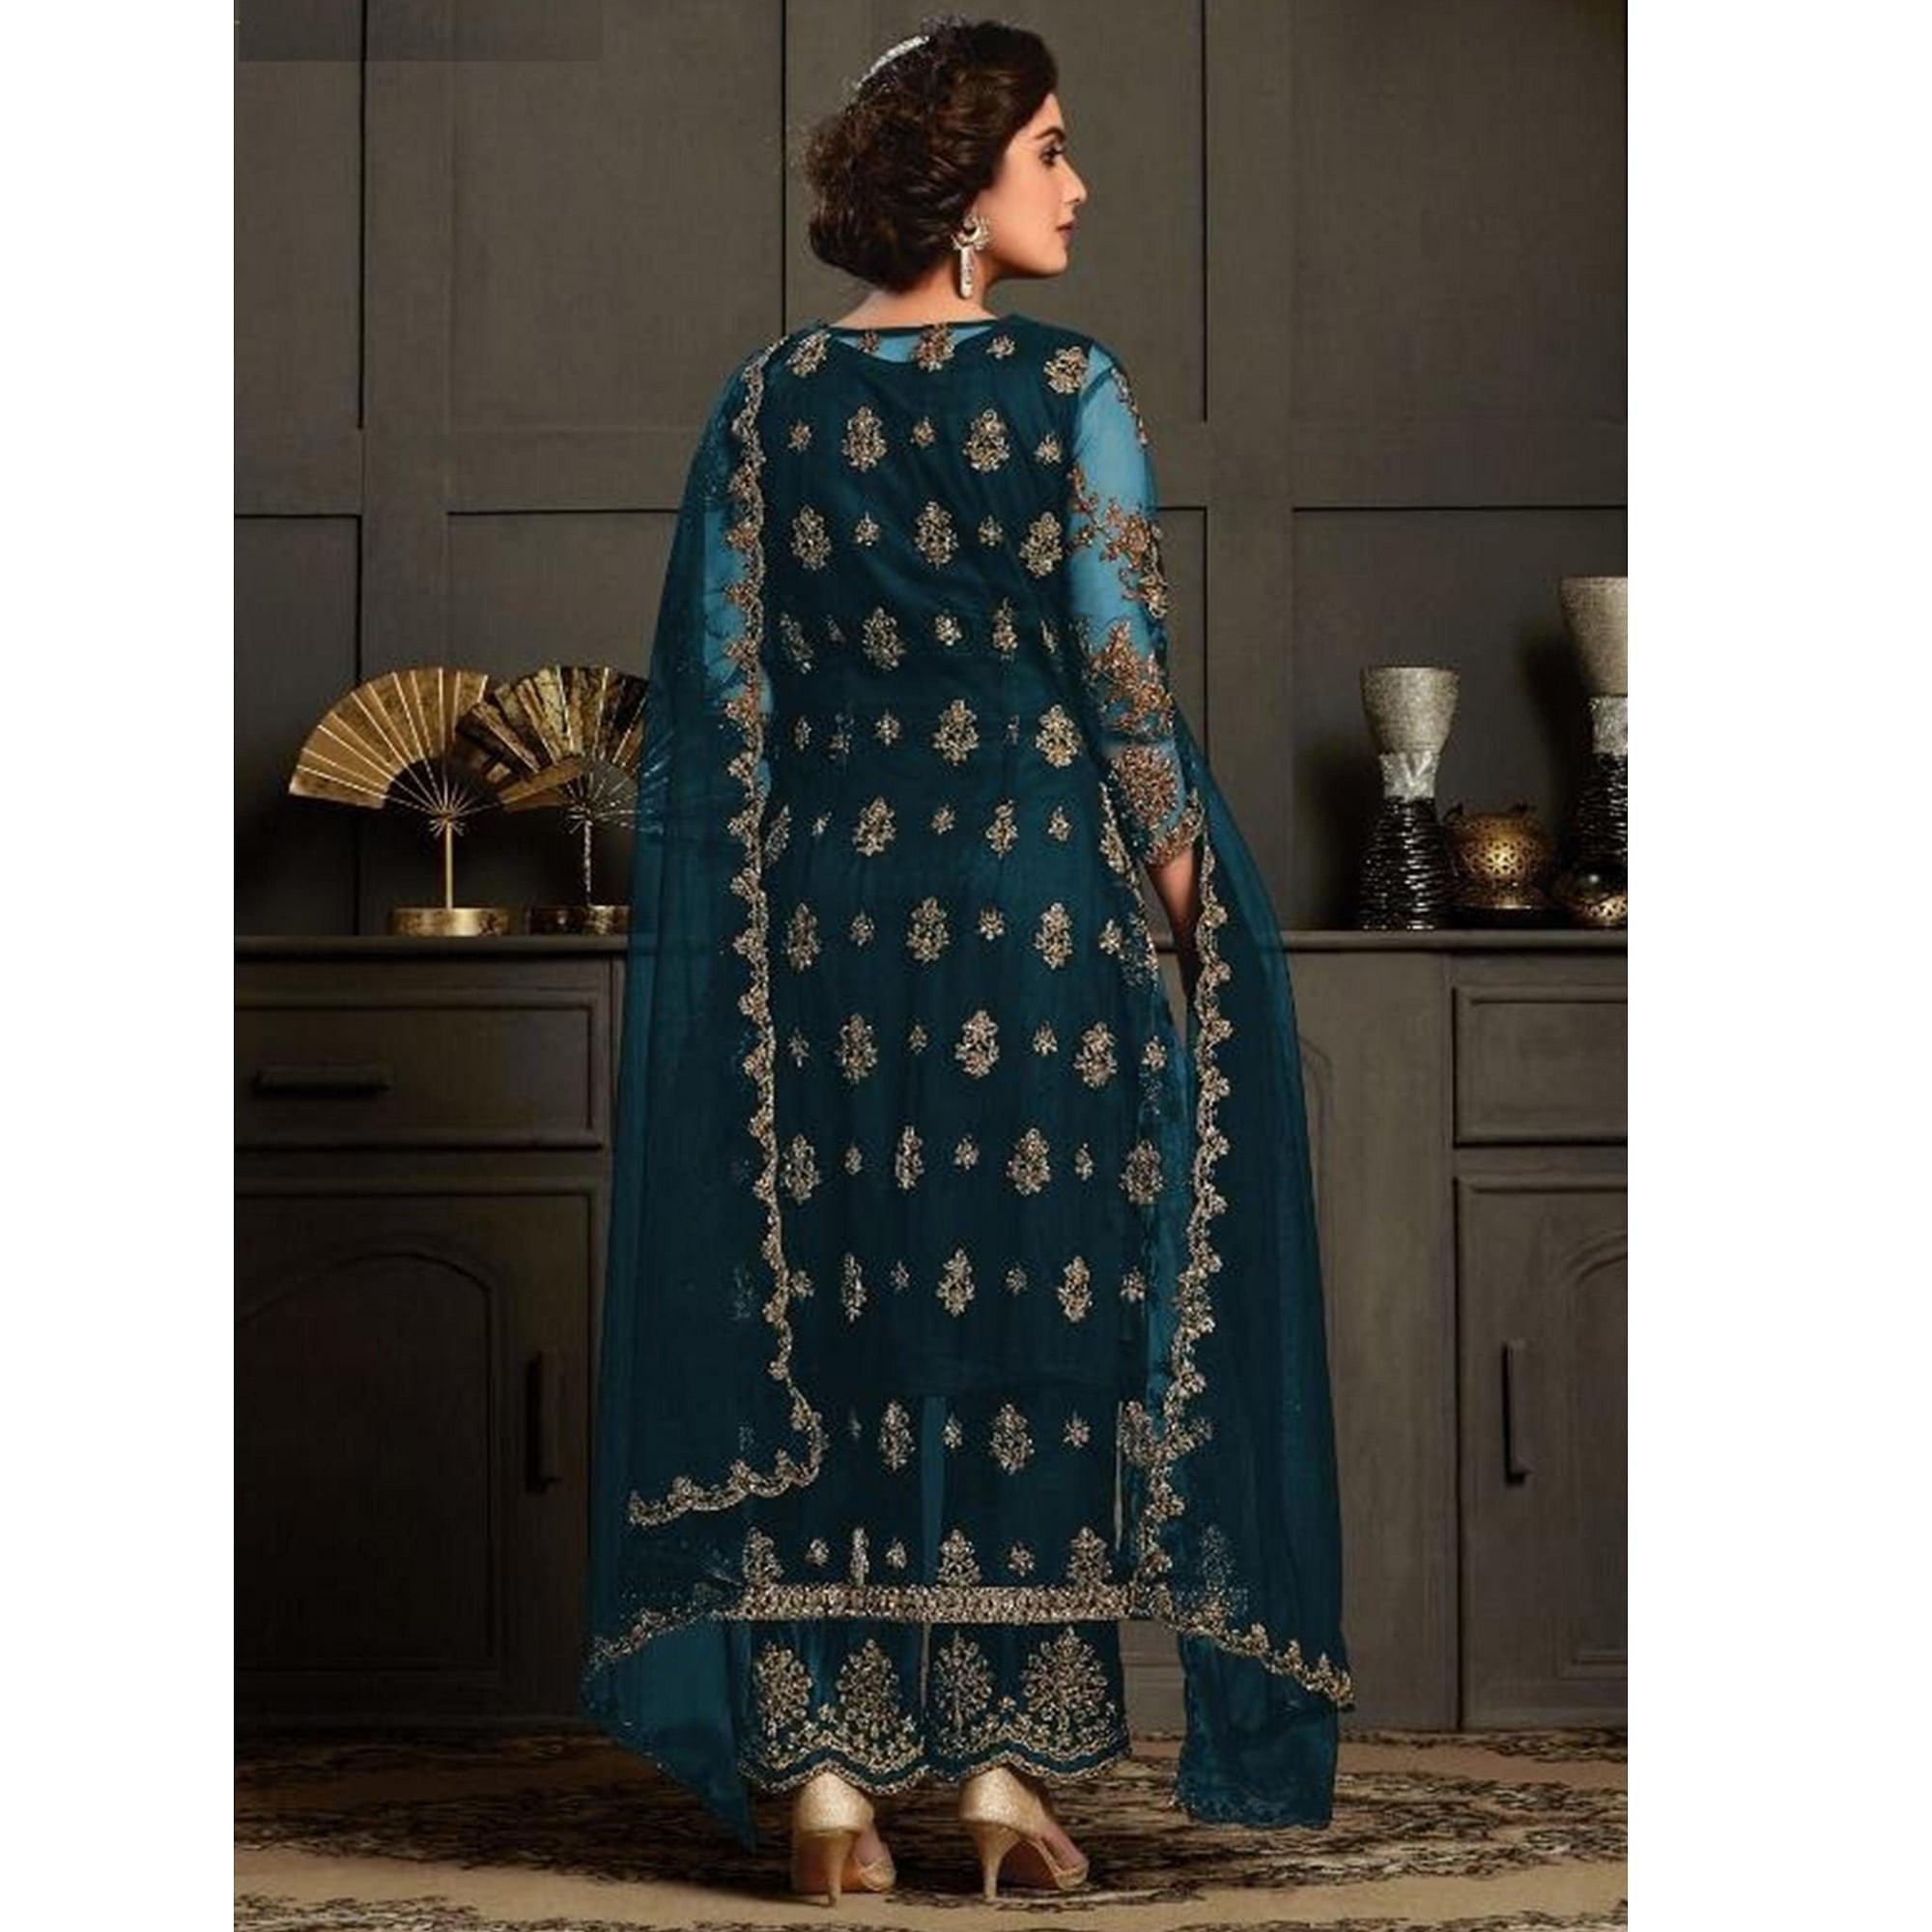 Classy Aqua Blue Coloured Party Wear Floral Embroidered Butterfly Net Pakistani Straight Suit - Peachmode